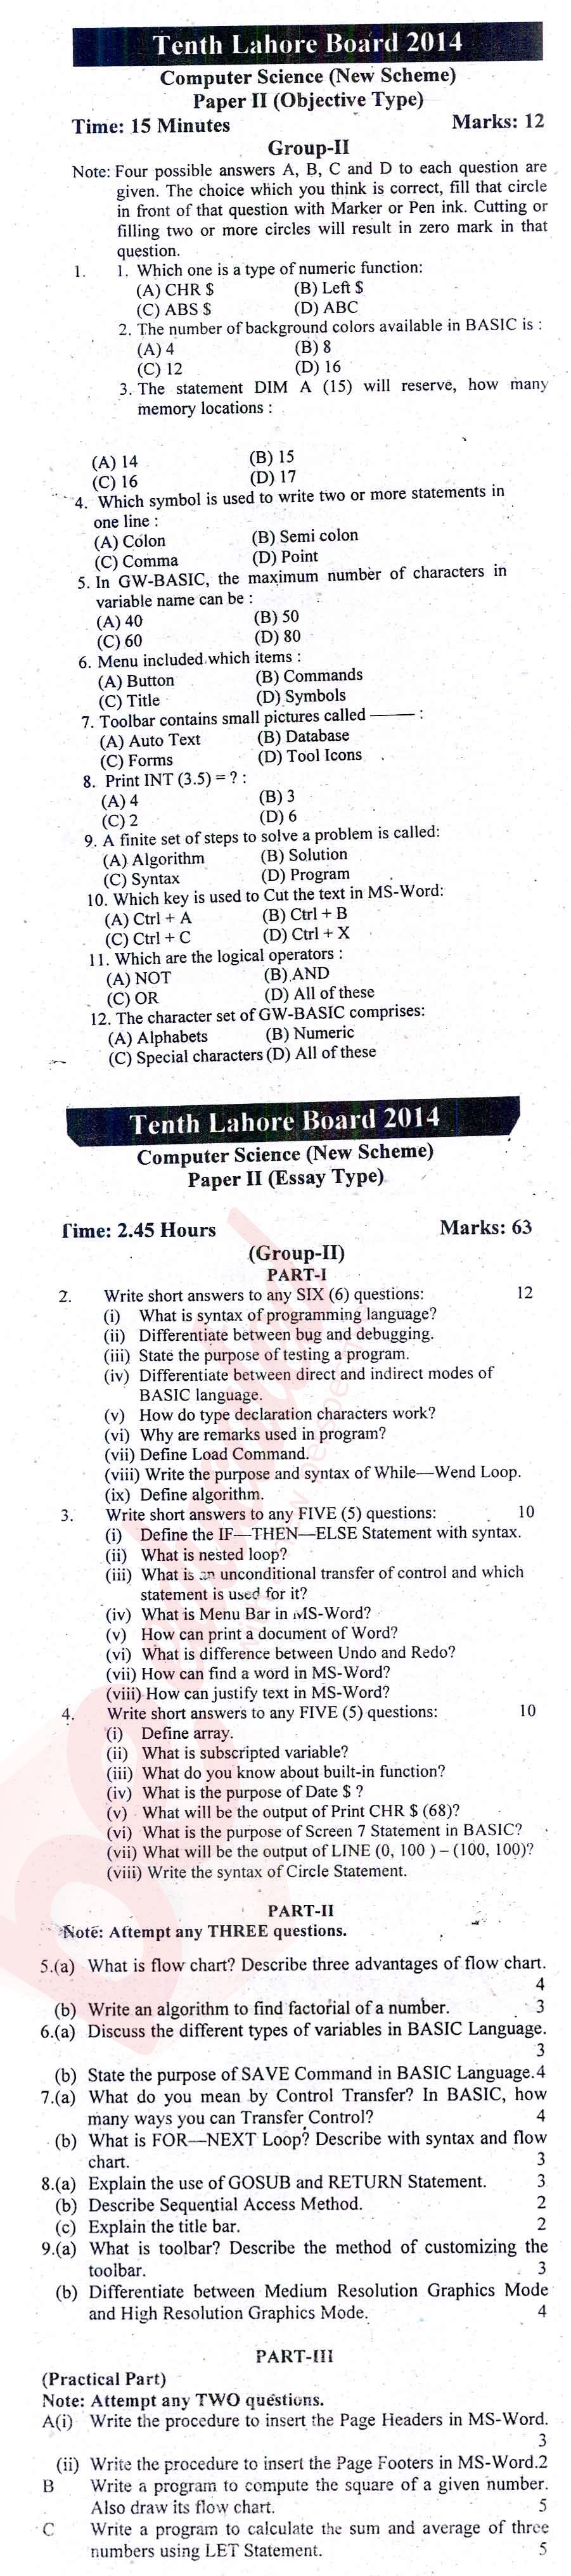 Computer Science 10th English Medium Past Paper Group 2 BISE Lahore 2014